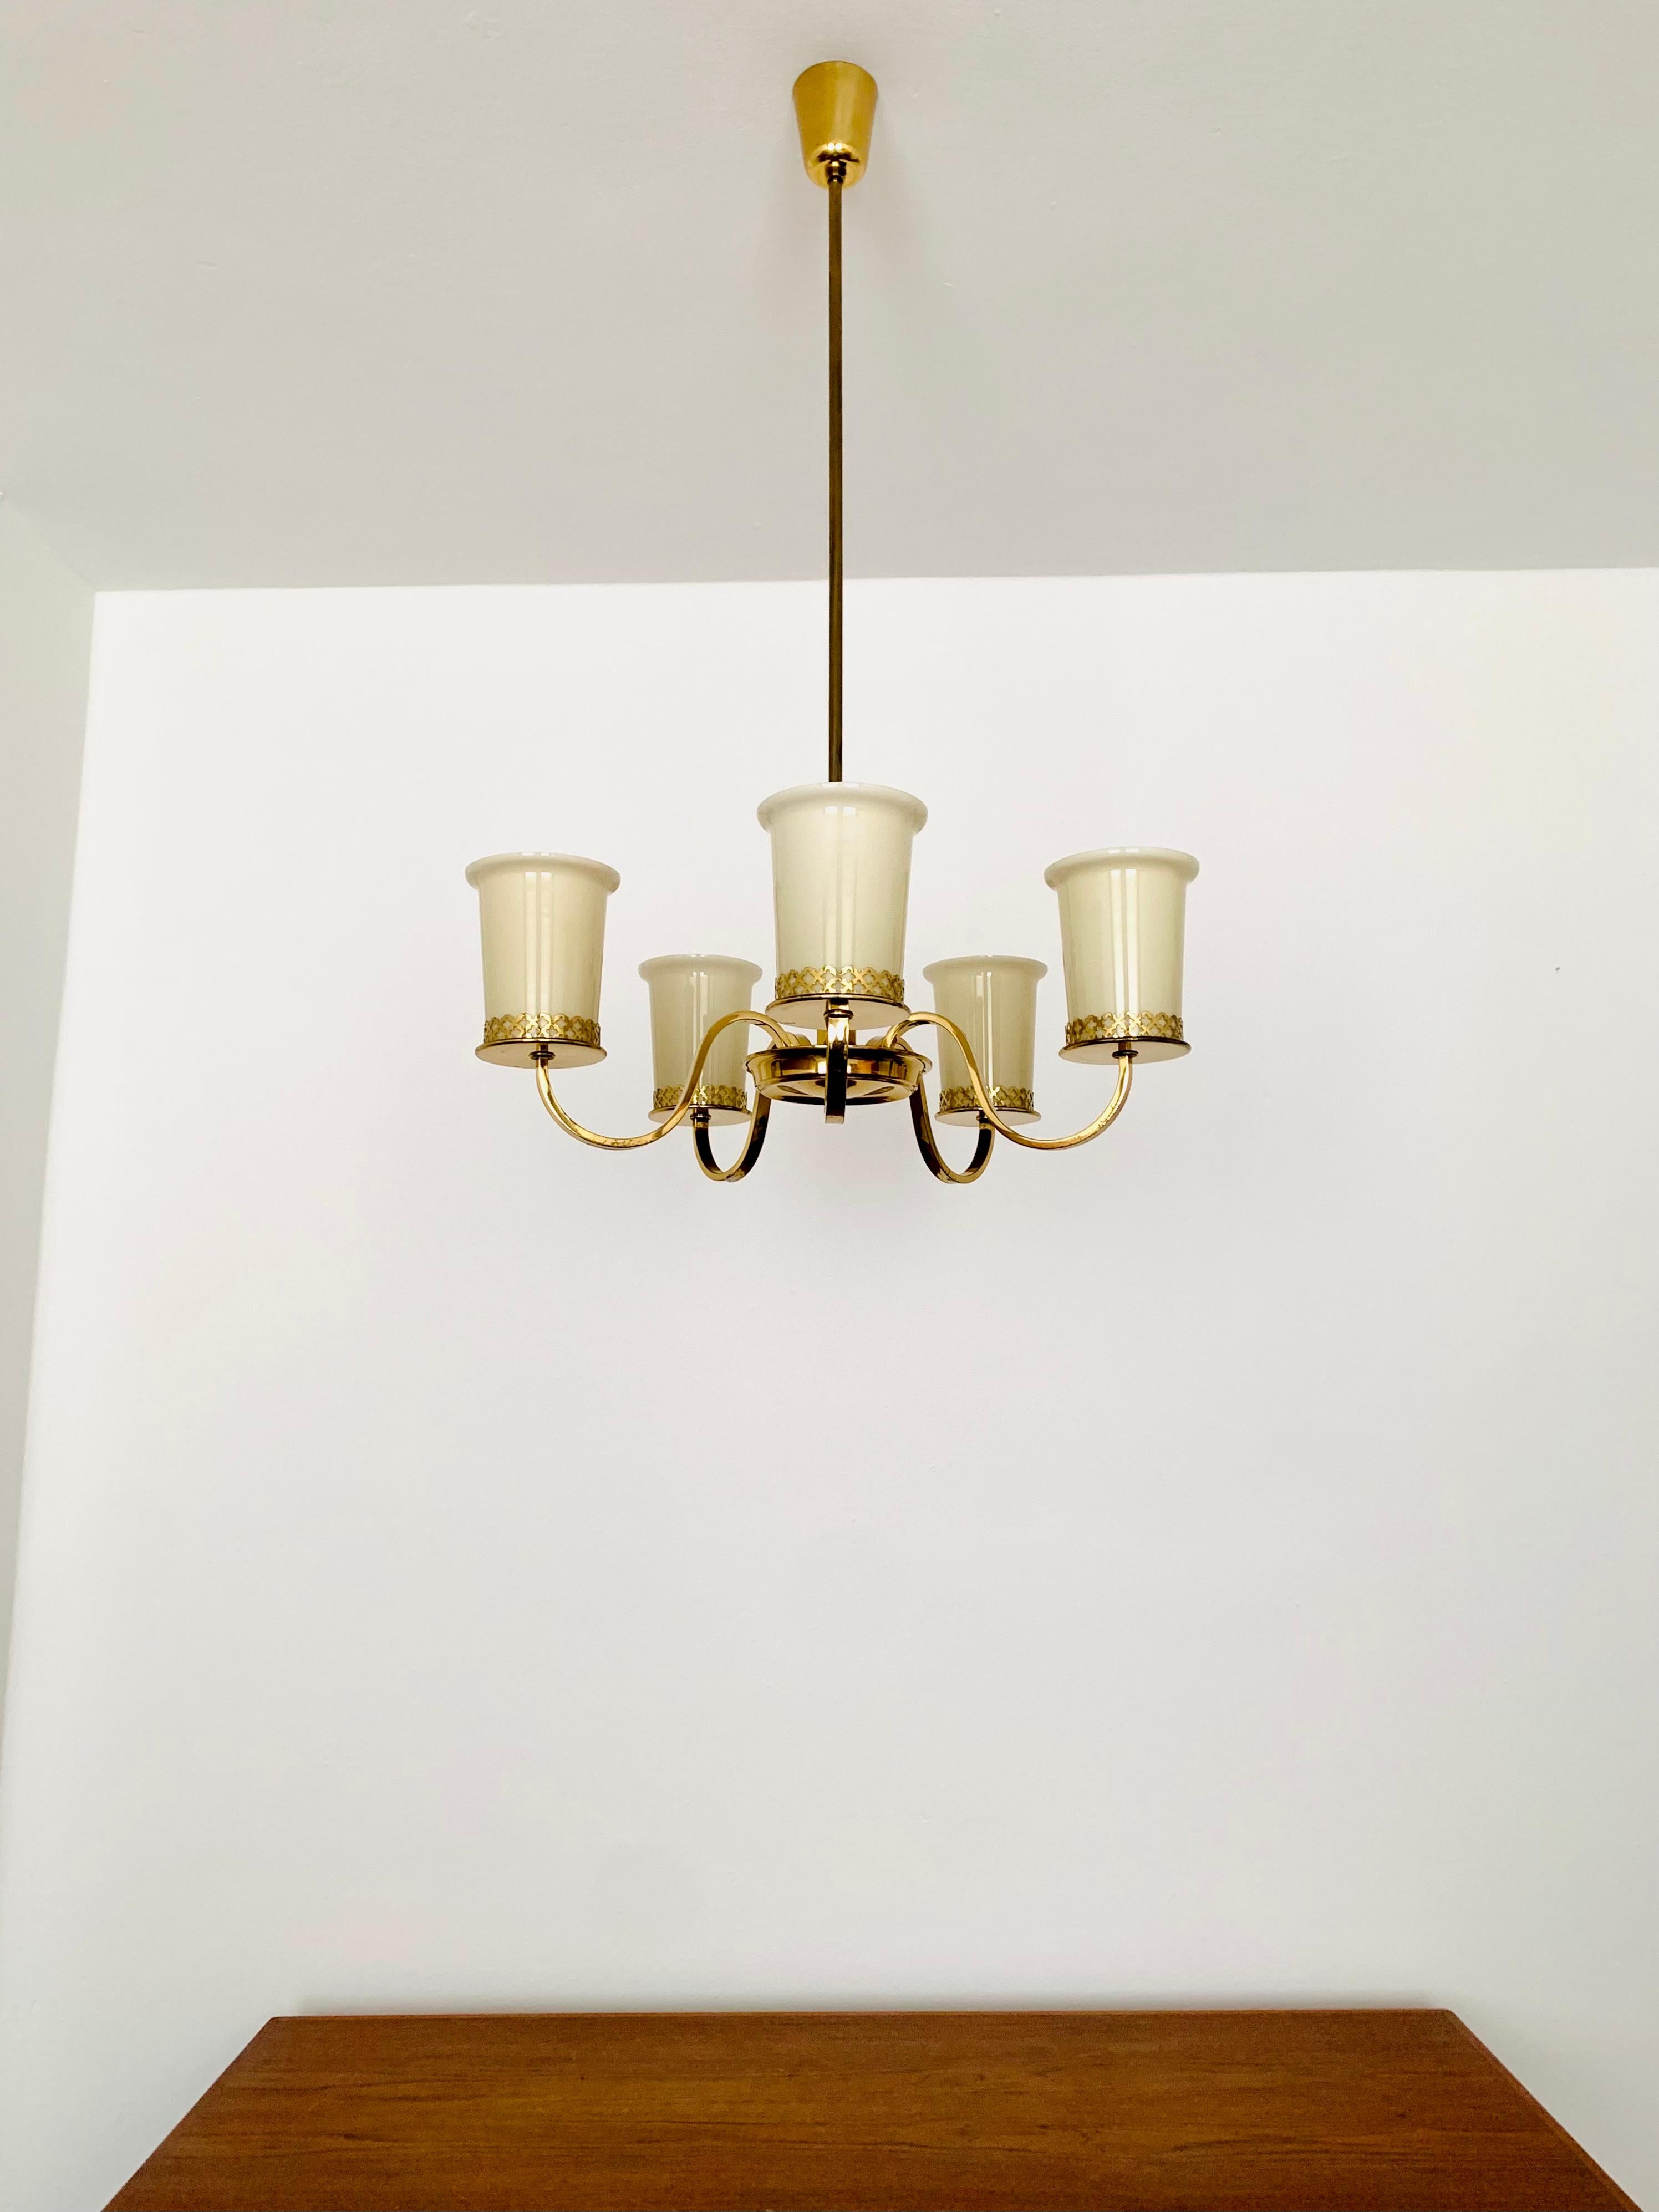 Impressive chandelier from the 1950s.
The lamp is very noble and elegant.
Loving details and high-quality workmanship.
Impressive contemporary design and an asset to any home.
A pleasantly warm lighting atmosphere is